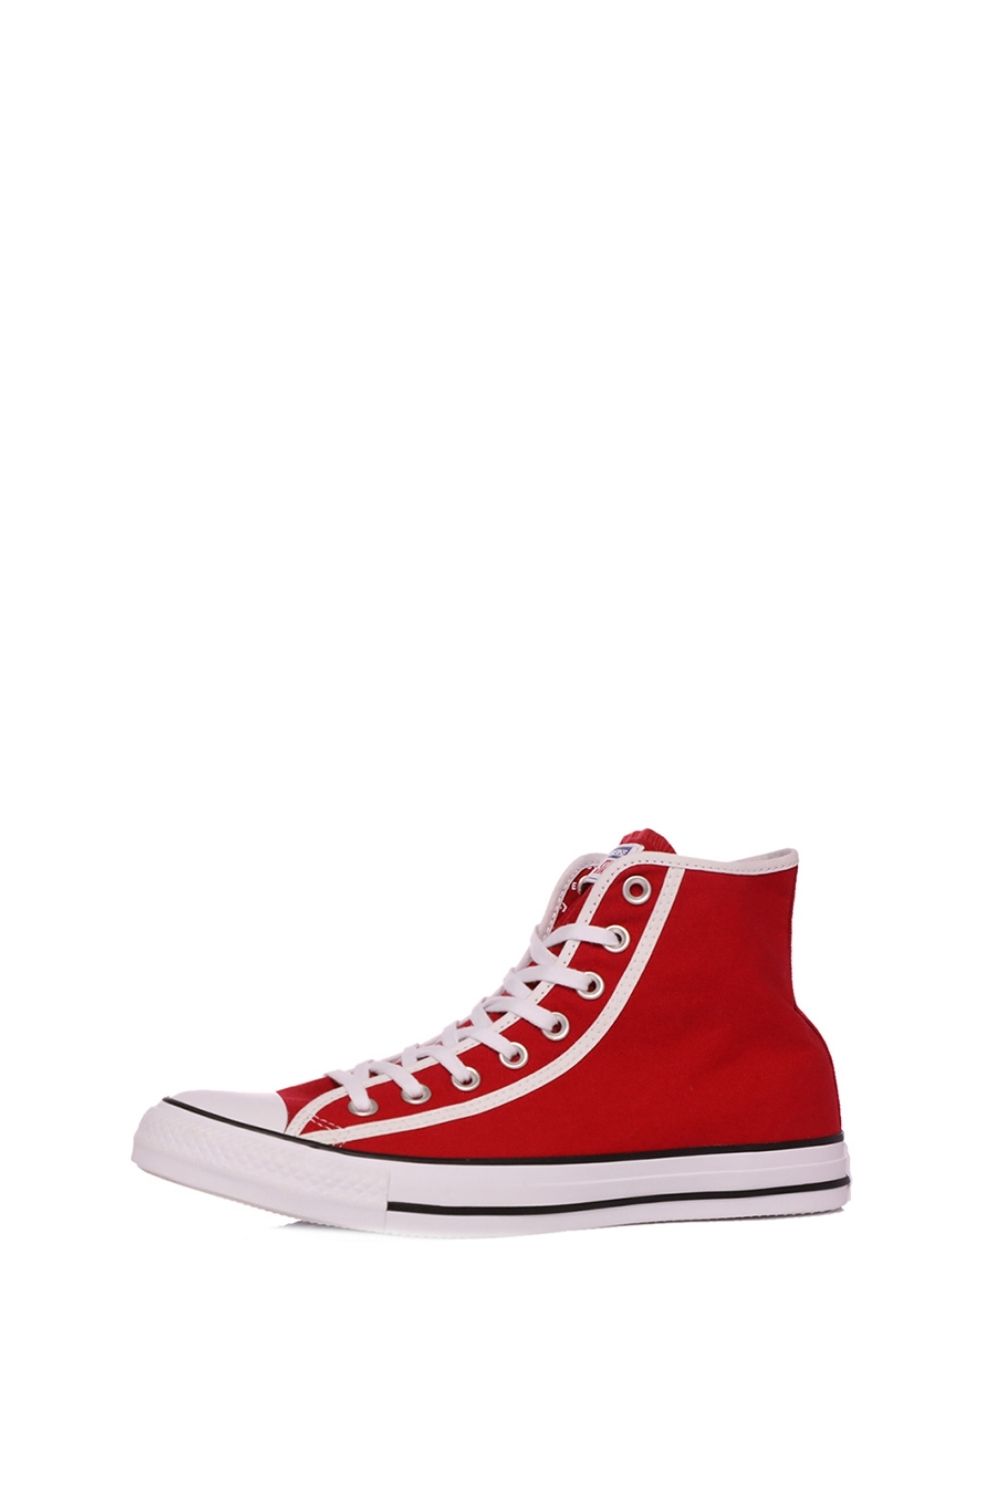 CONVERSE - Unisex sneakers CONVERSE CHUCK TAYLOR ALL STAR HI κόκκινα Γυναικεία/Παπούτσια/Sneakers